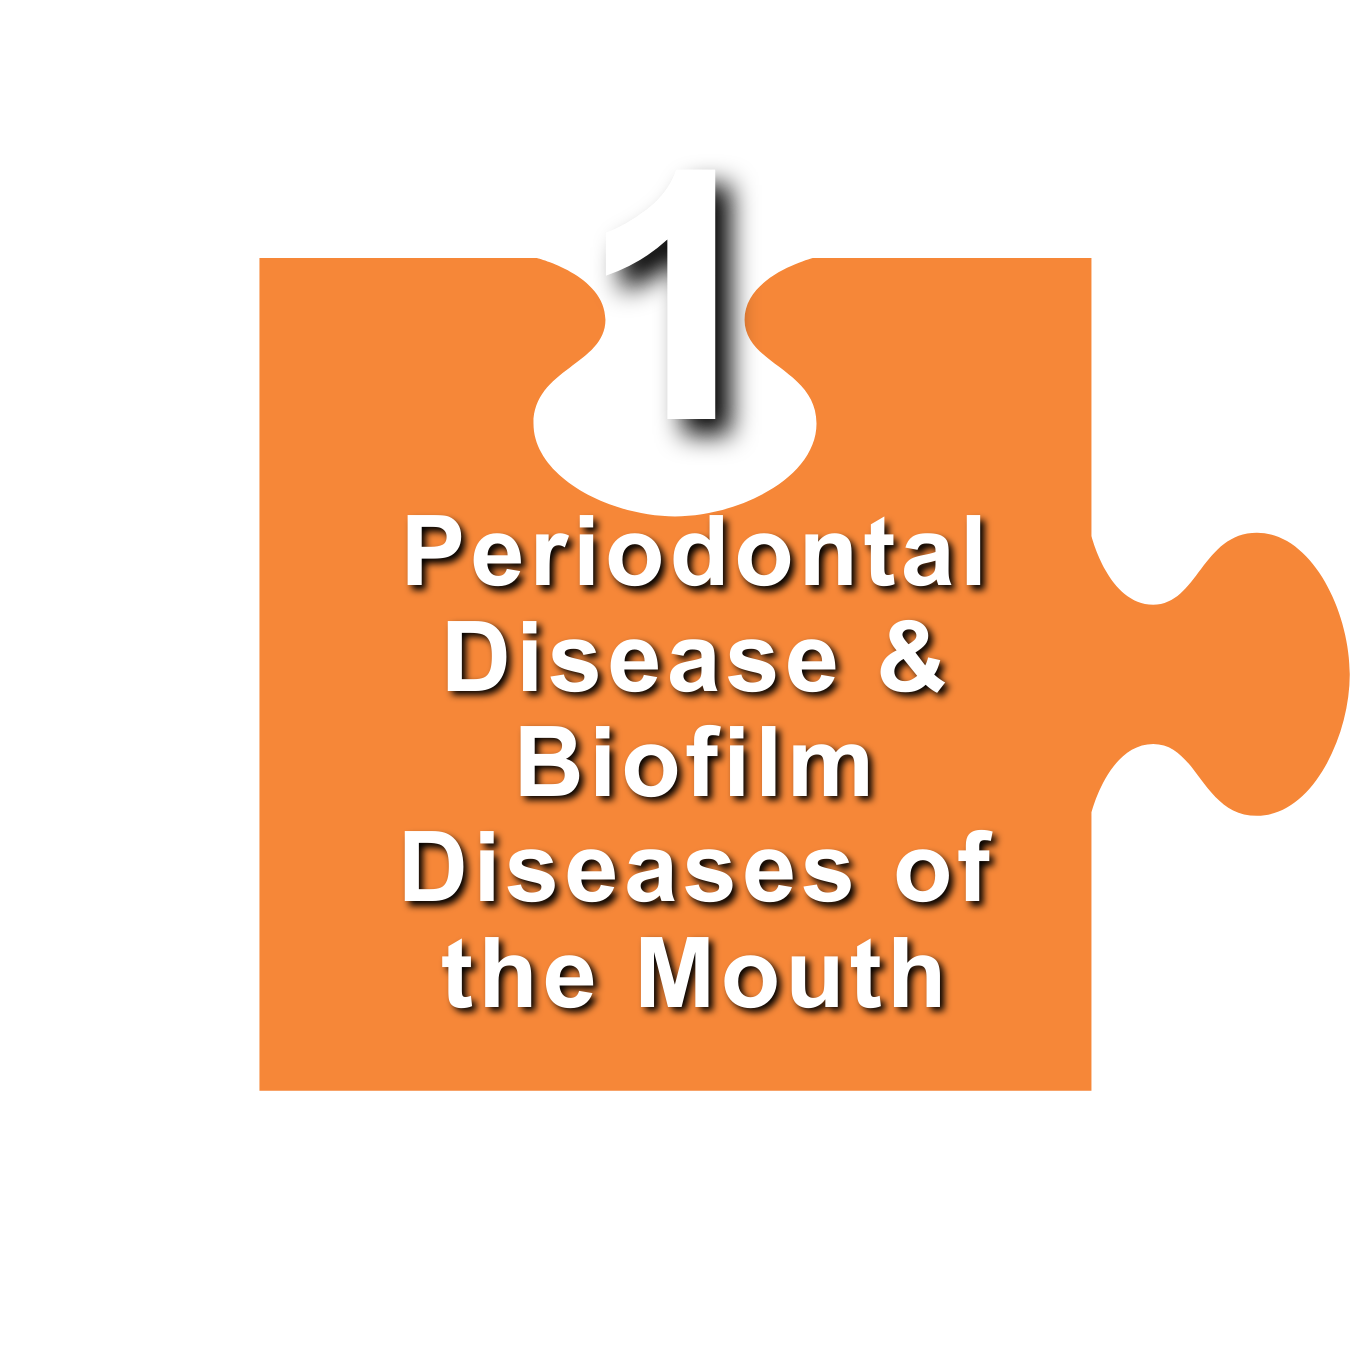 1. Periodontal Disease and Biofilm Diseases of the Mouth